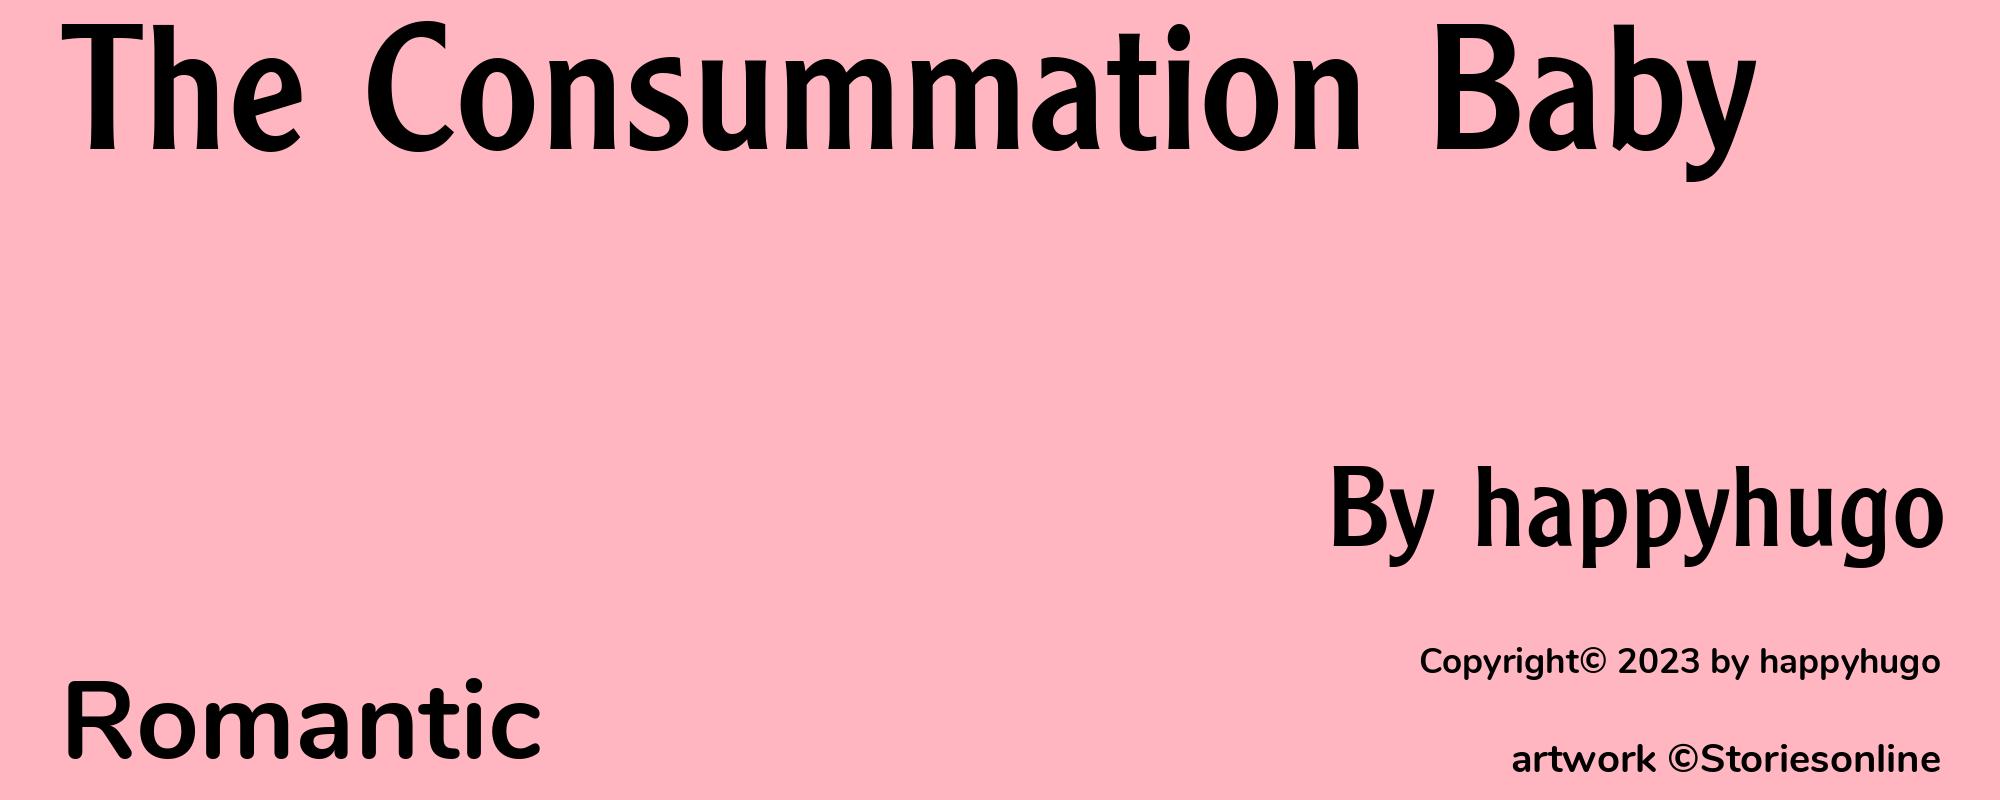 The Consummation Baby - Cover